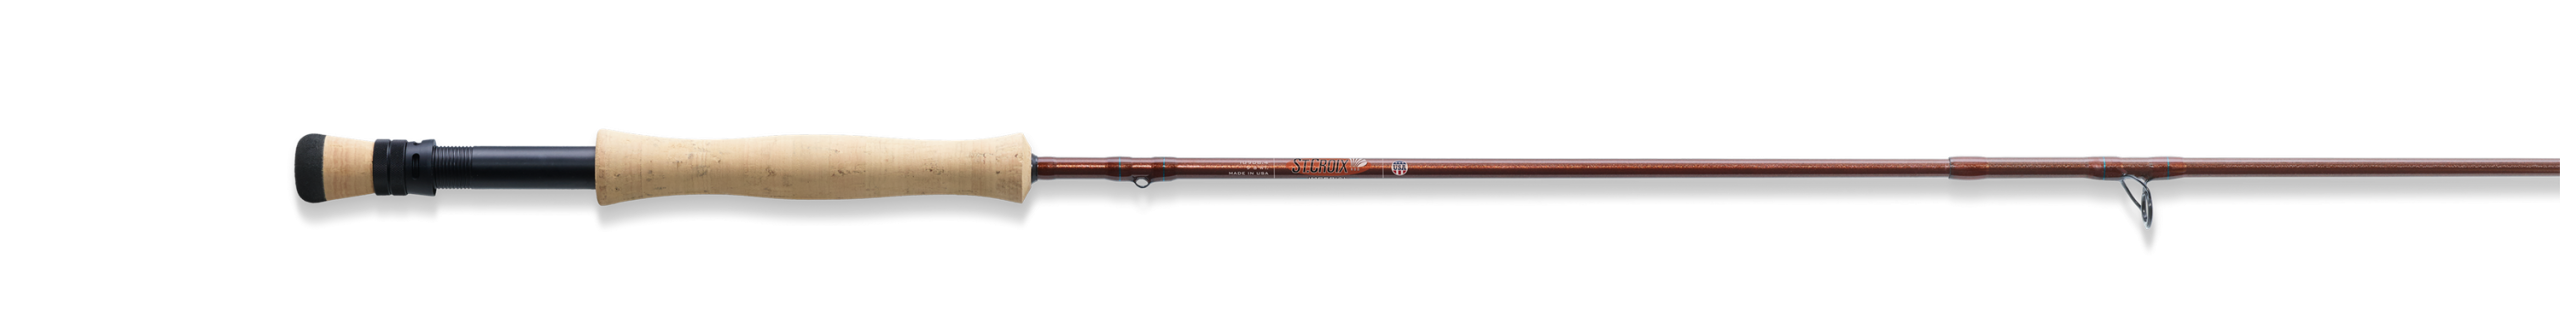 IMPERIAL® USA FLY SWITCH RODS – Stcroixus